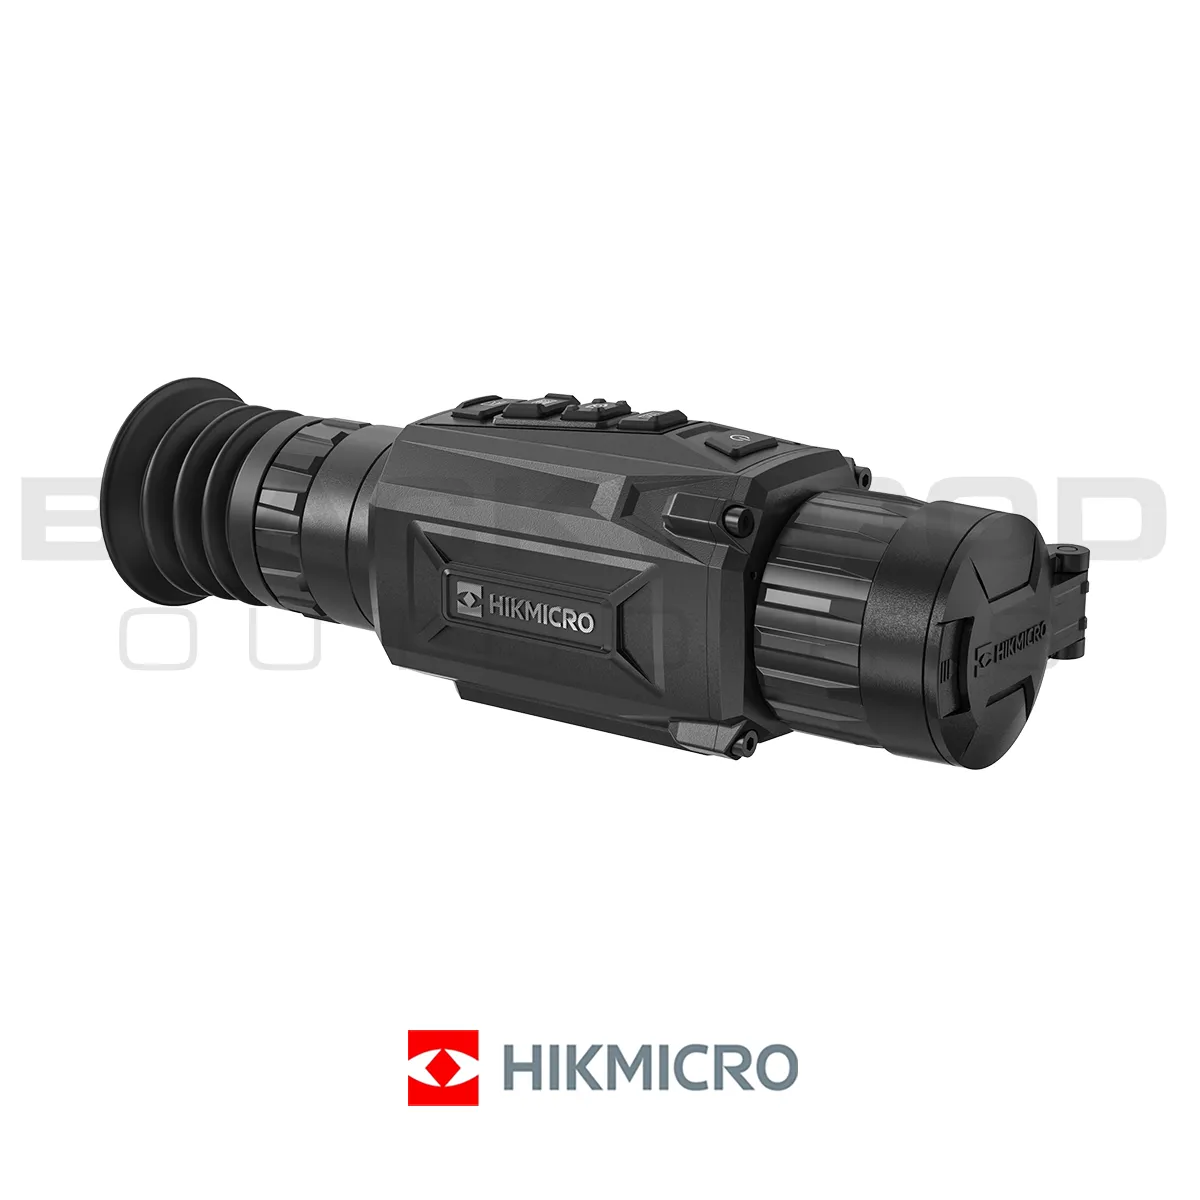 HikMicro Thunder TE19 2.0 Thermal Scope Right View